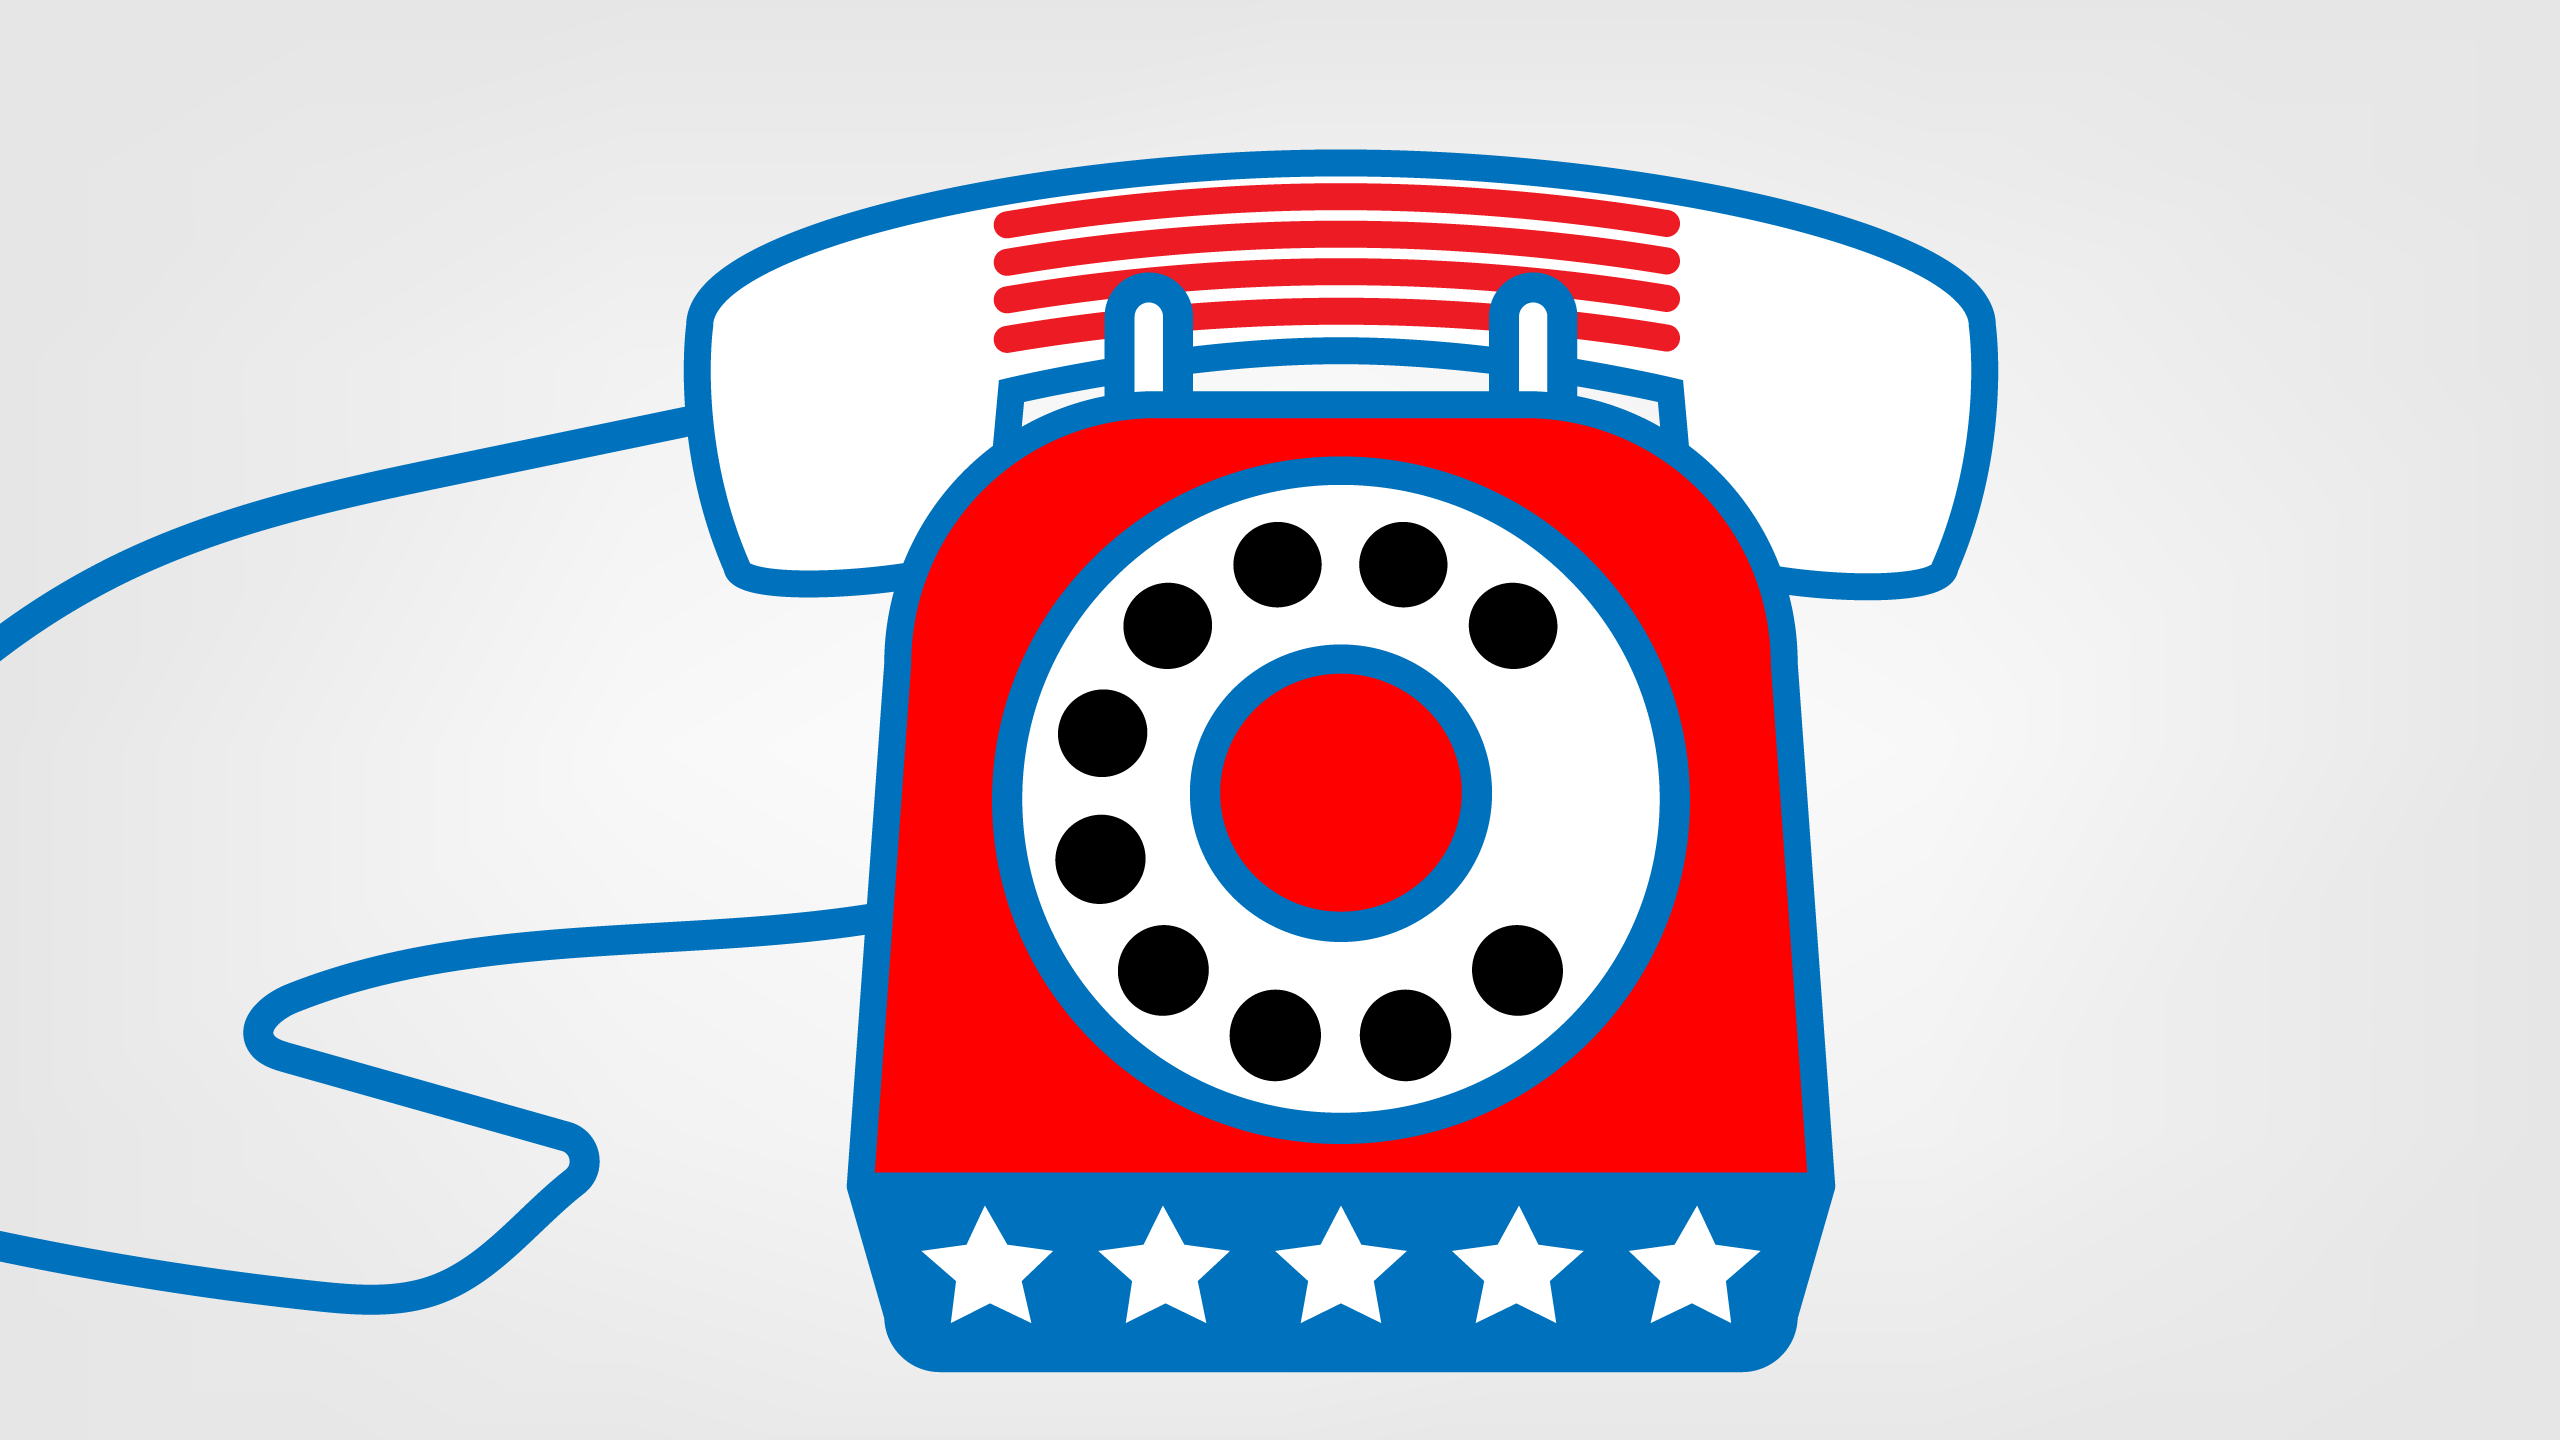 Making Political Engagement Accessible - 5 Calls , HD Wallpaper & Backgrounds